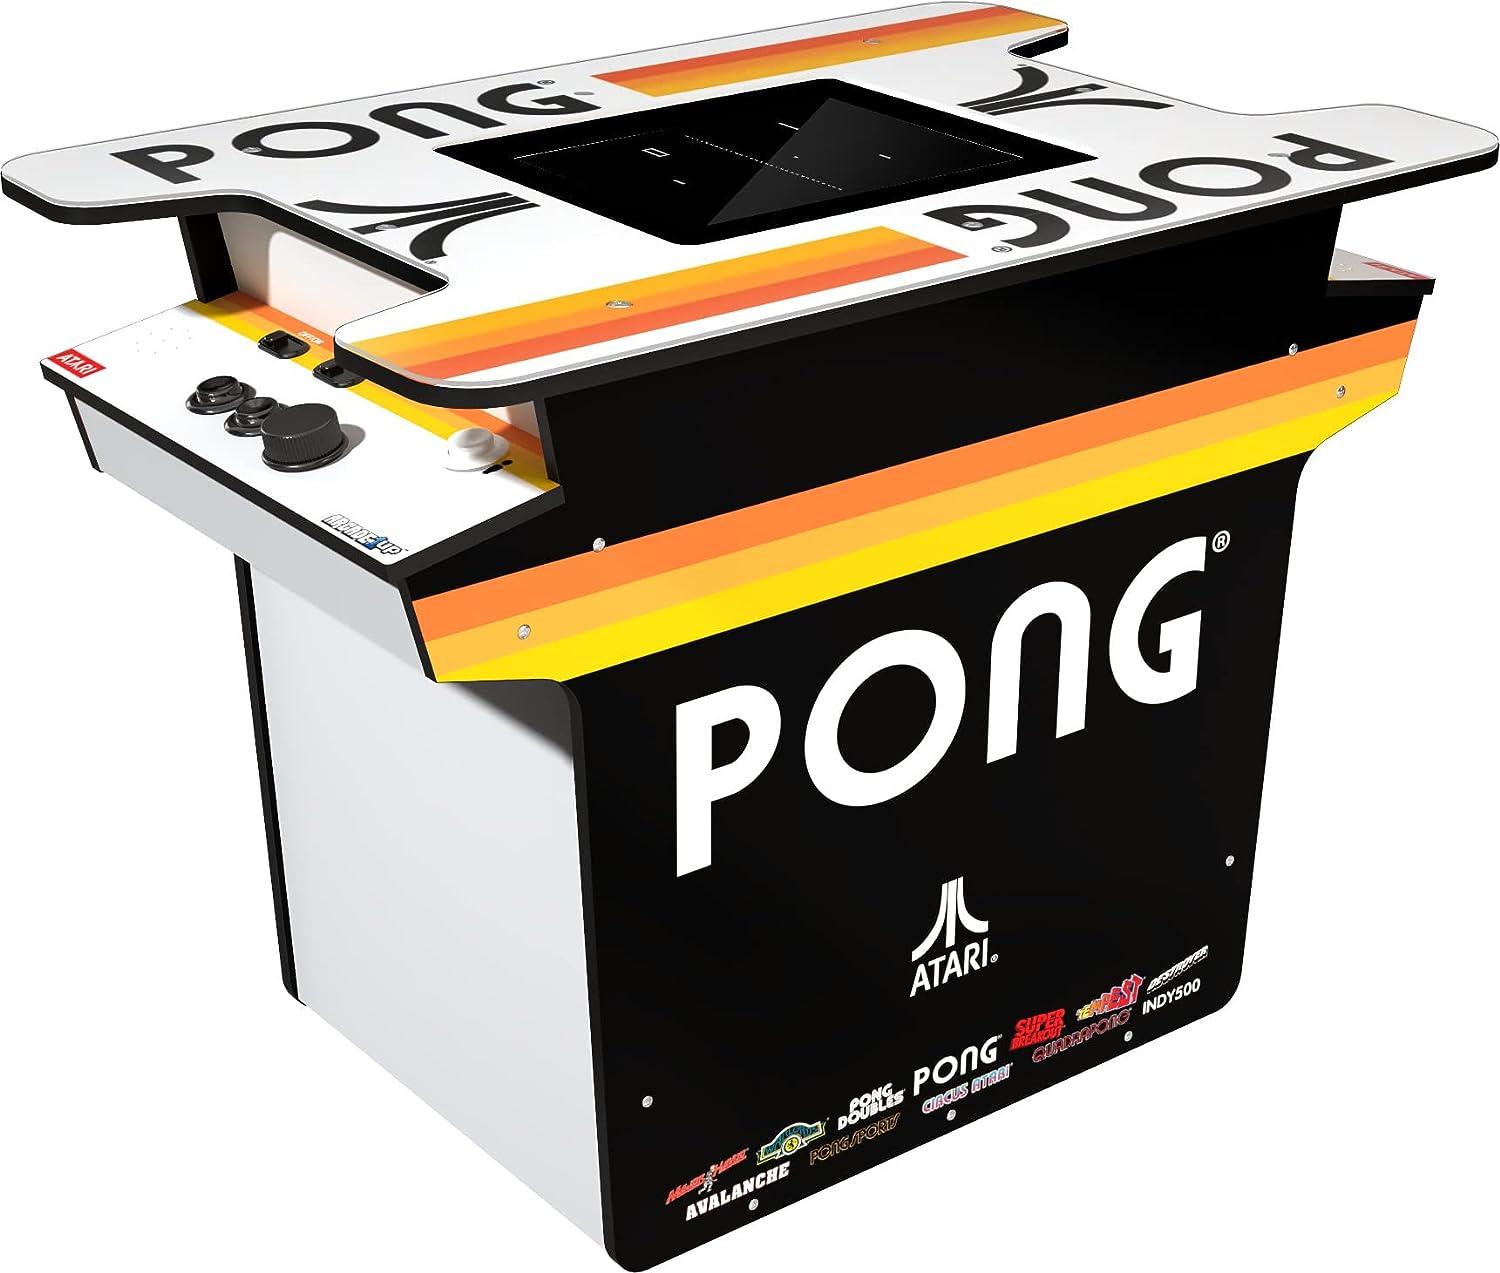 Arcade1Up Pong Head-to-Head Arcade Table for $299.99 Shipped